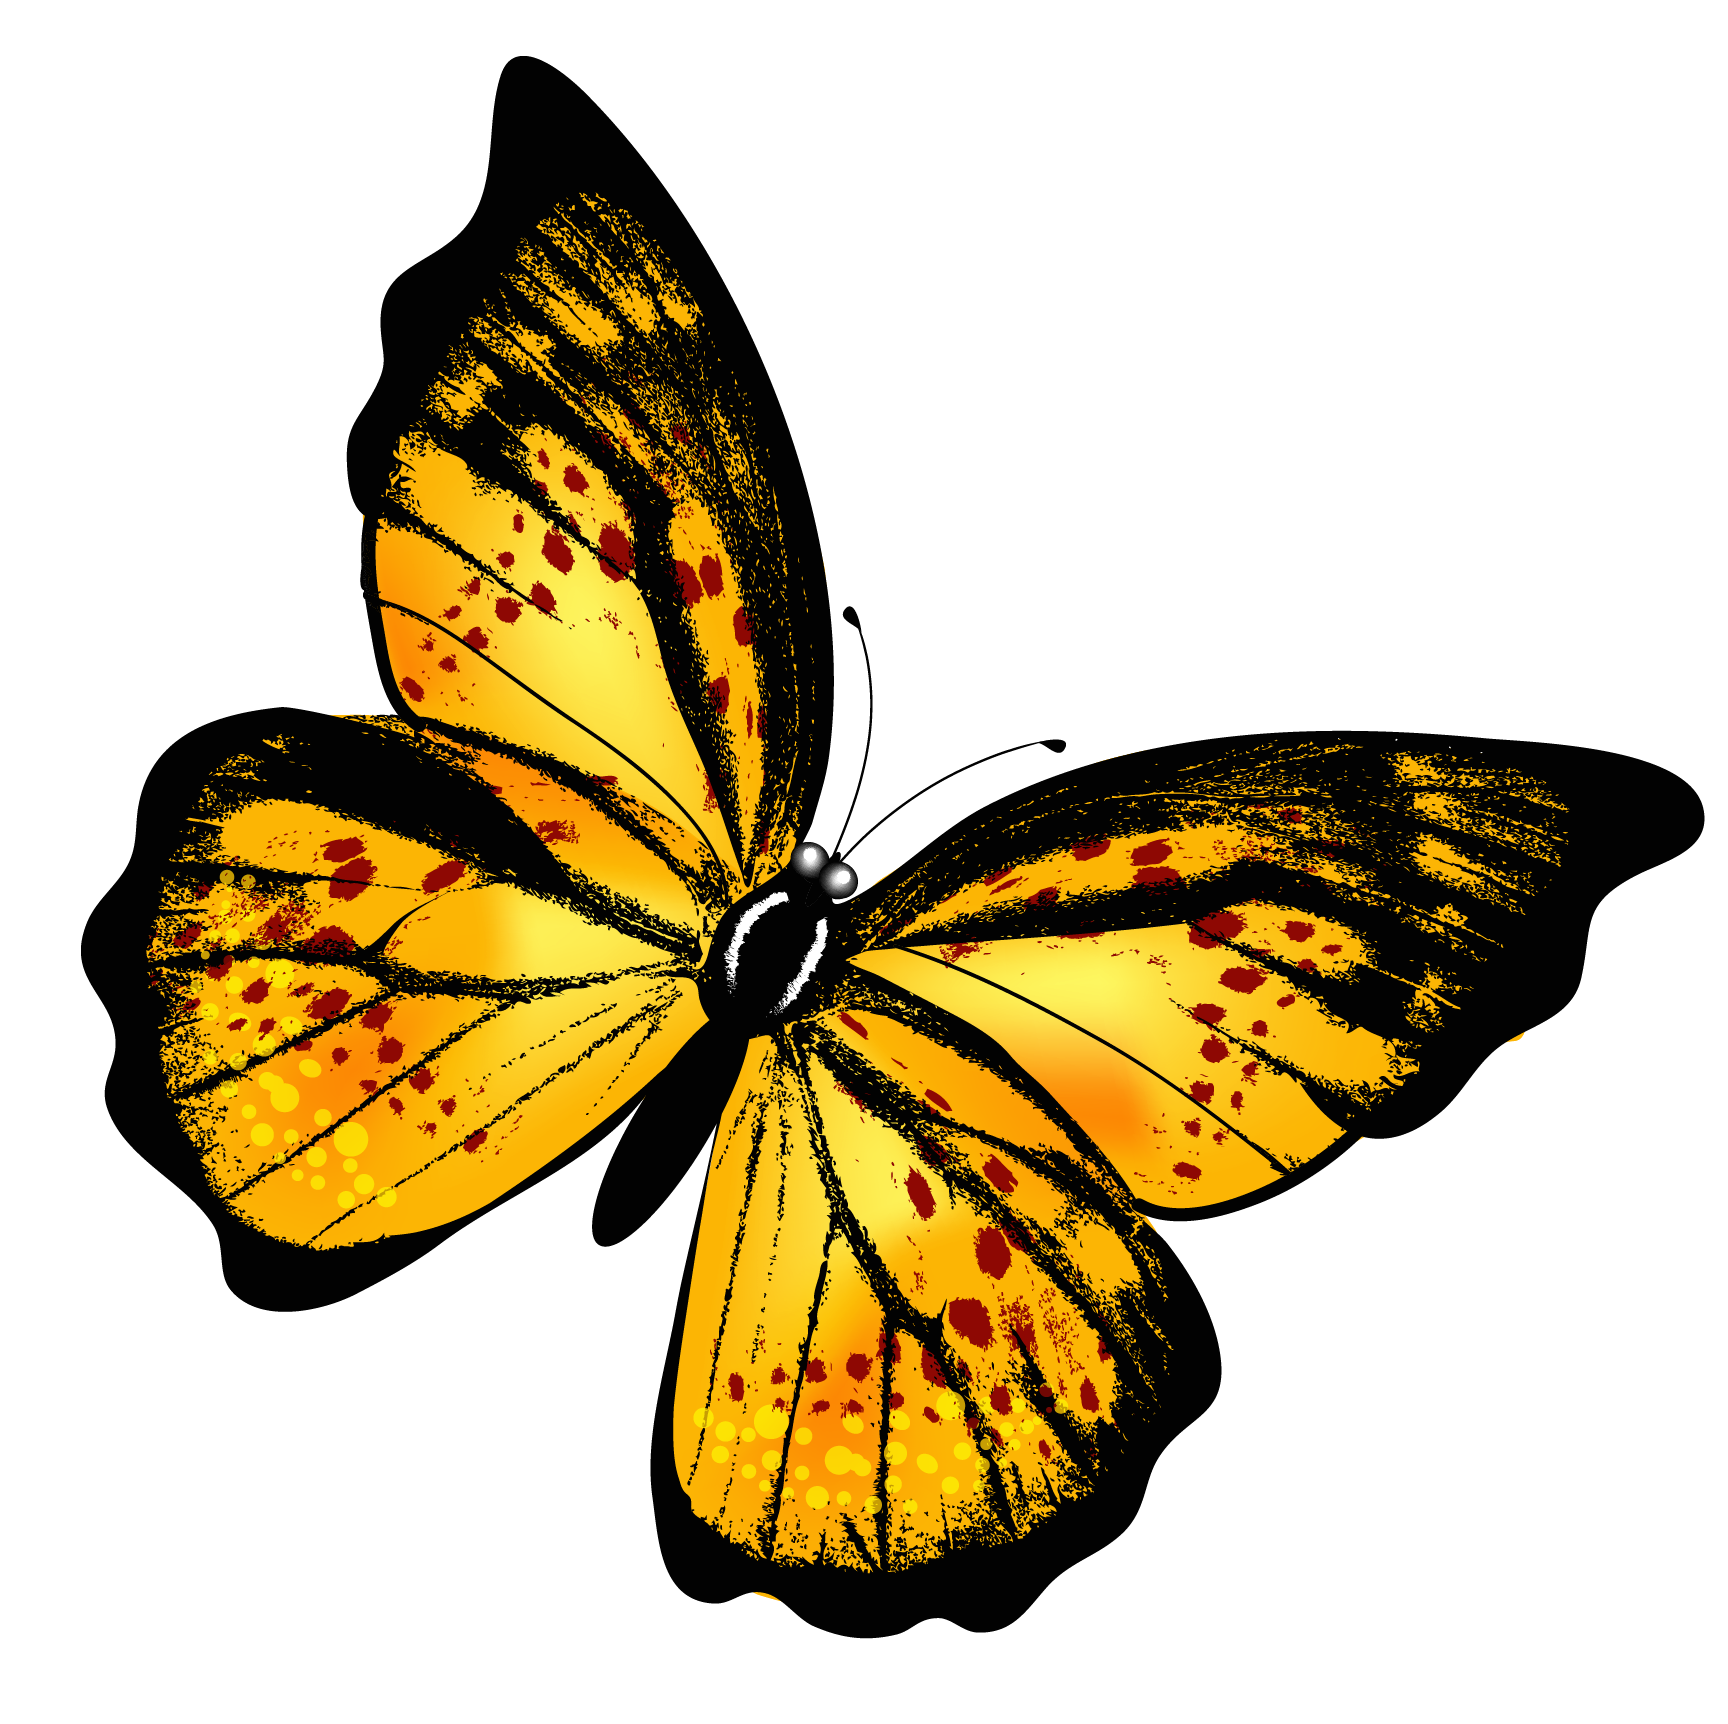 Aesthetic Butterfly Transparent Background